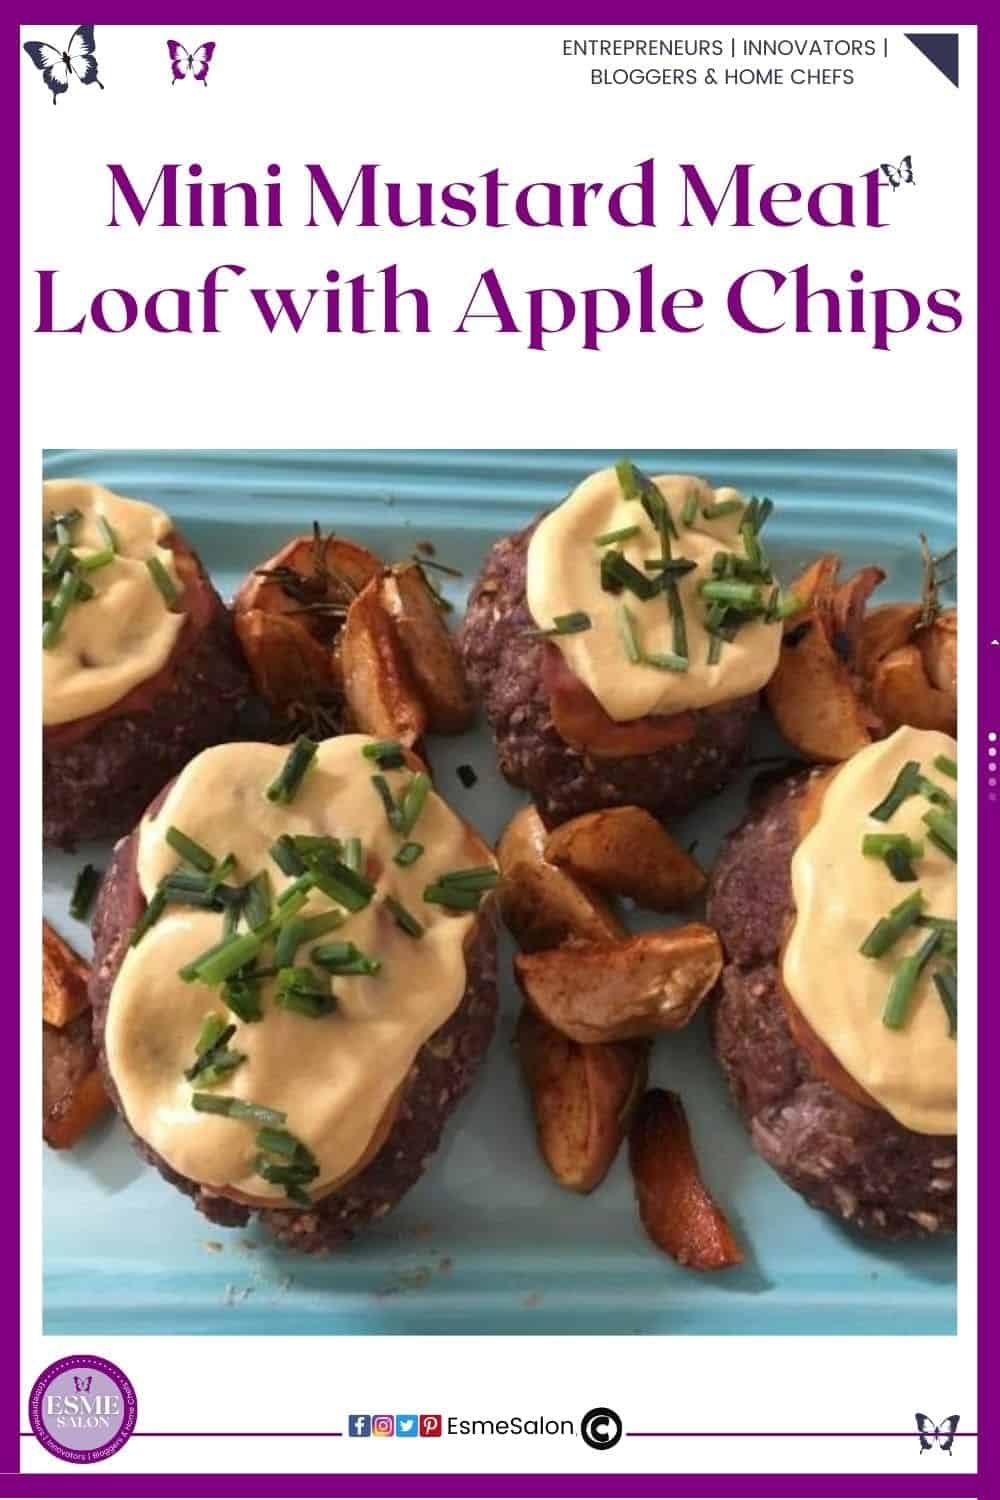 an image of a Mini Mustard Meat Loaf with Apple Chips placed on top of meat with mustard topping